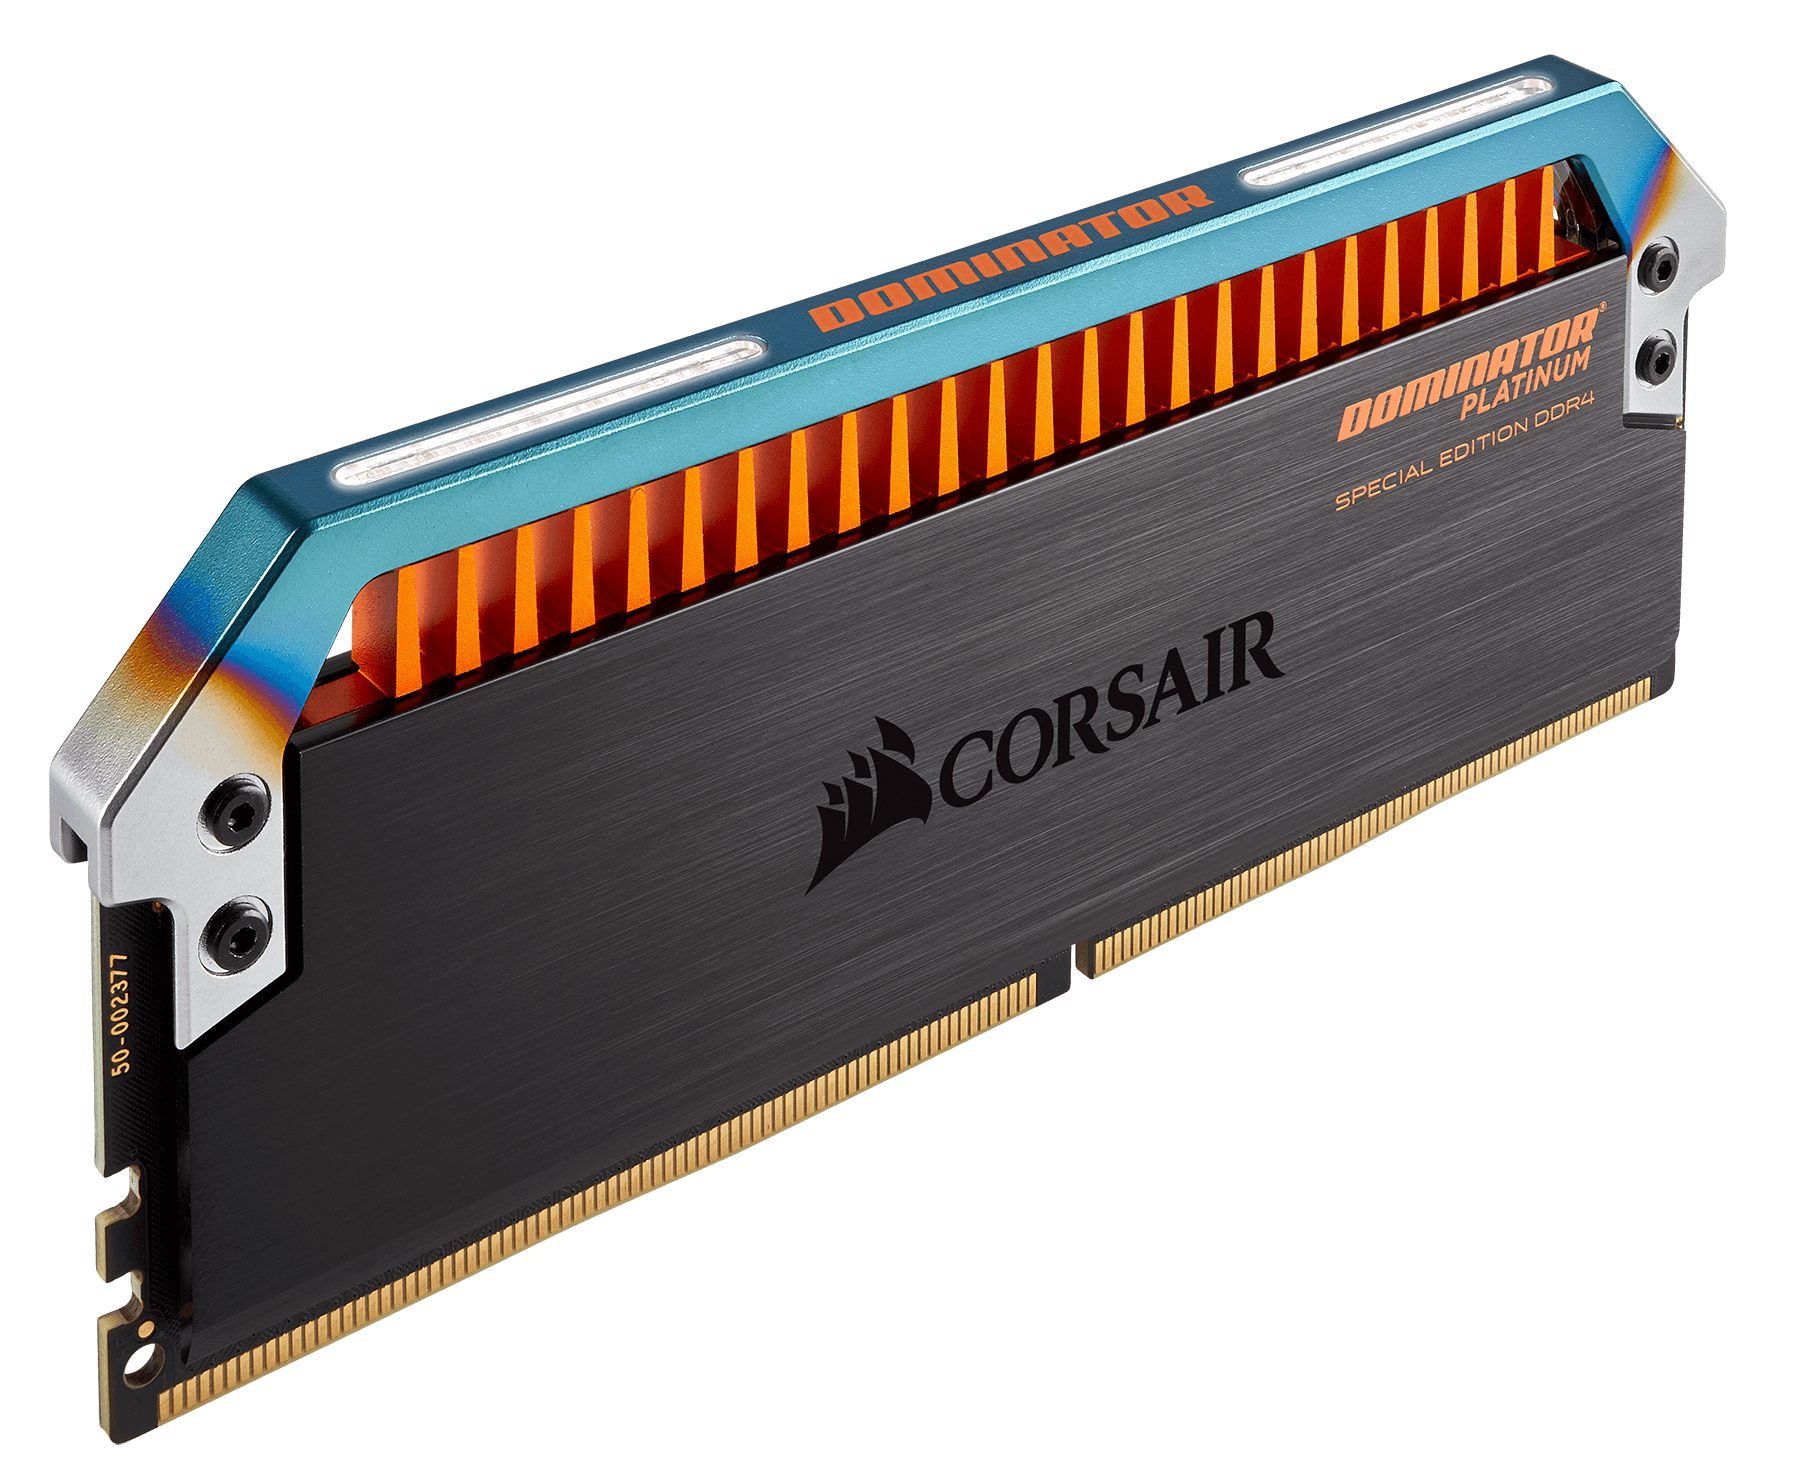 Media asset in full size related to 3dfxzone.it news item entitled as follows: Corsair commercializza le DDR4 DOMINATOR PLATINUM Special Edition Torque | Image Name: news26330_Corsair-DOMINATOR-PLATINUM-Special-Edition-Torque_1.png